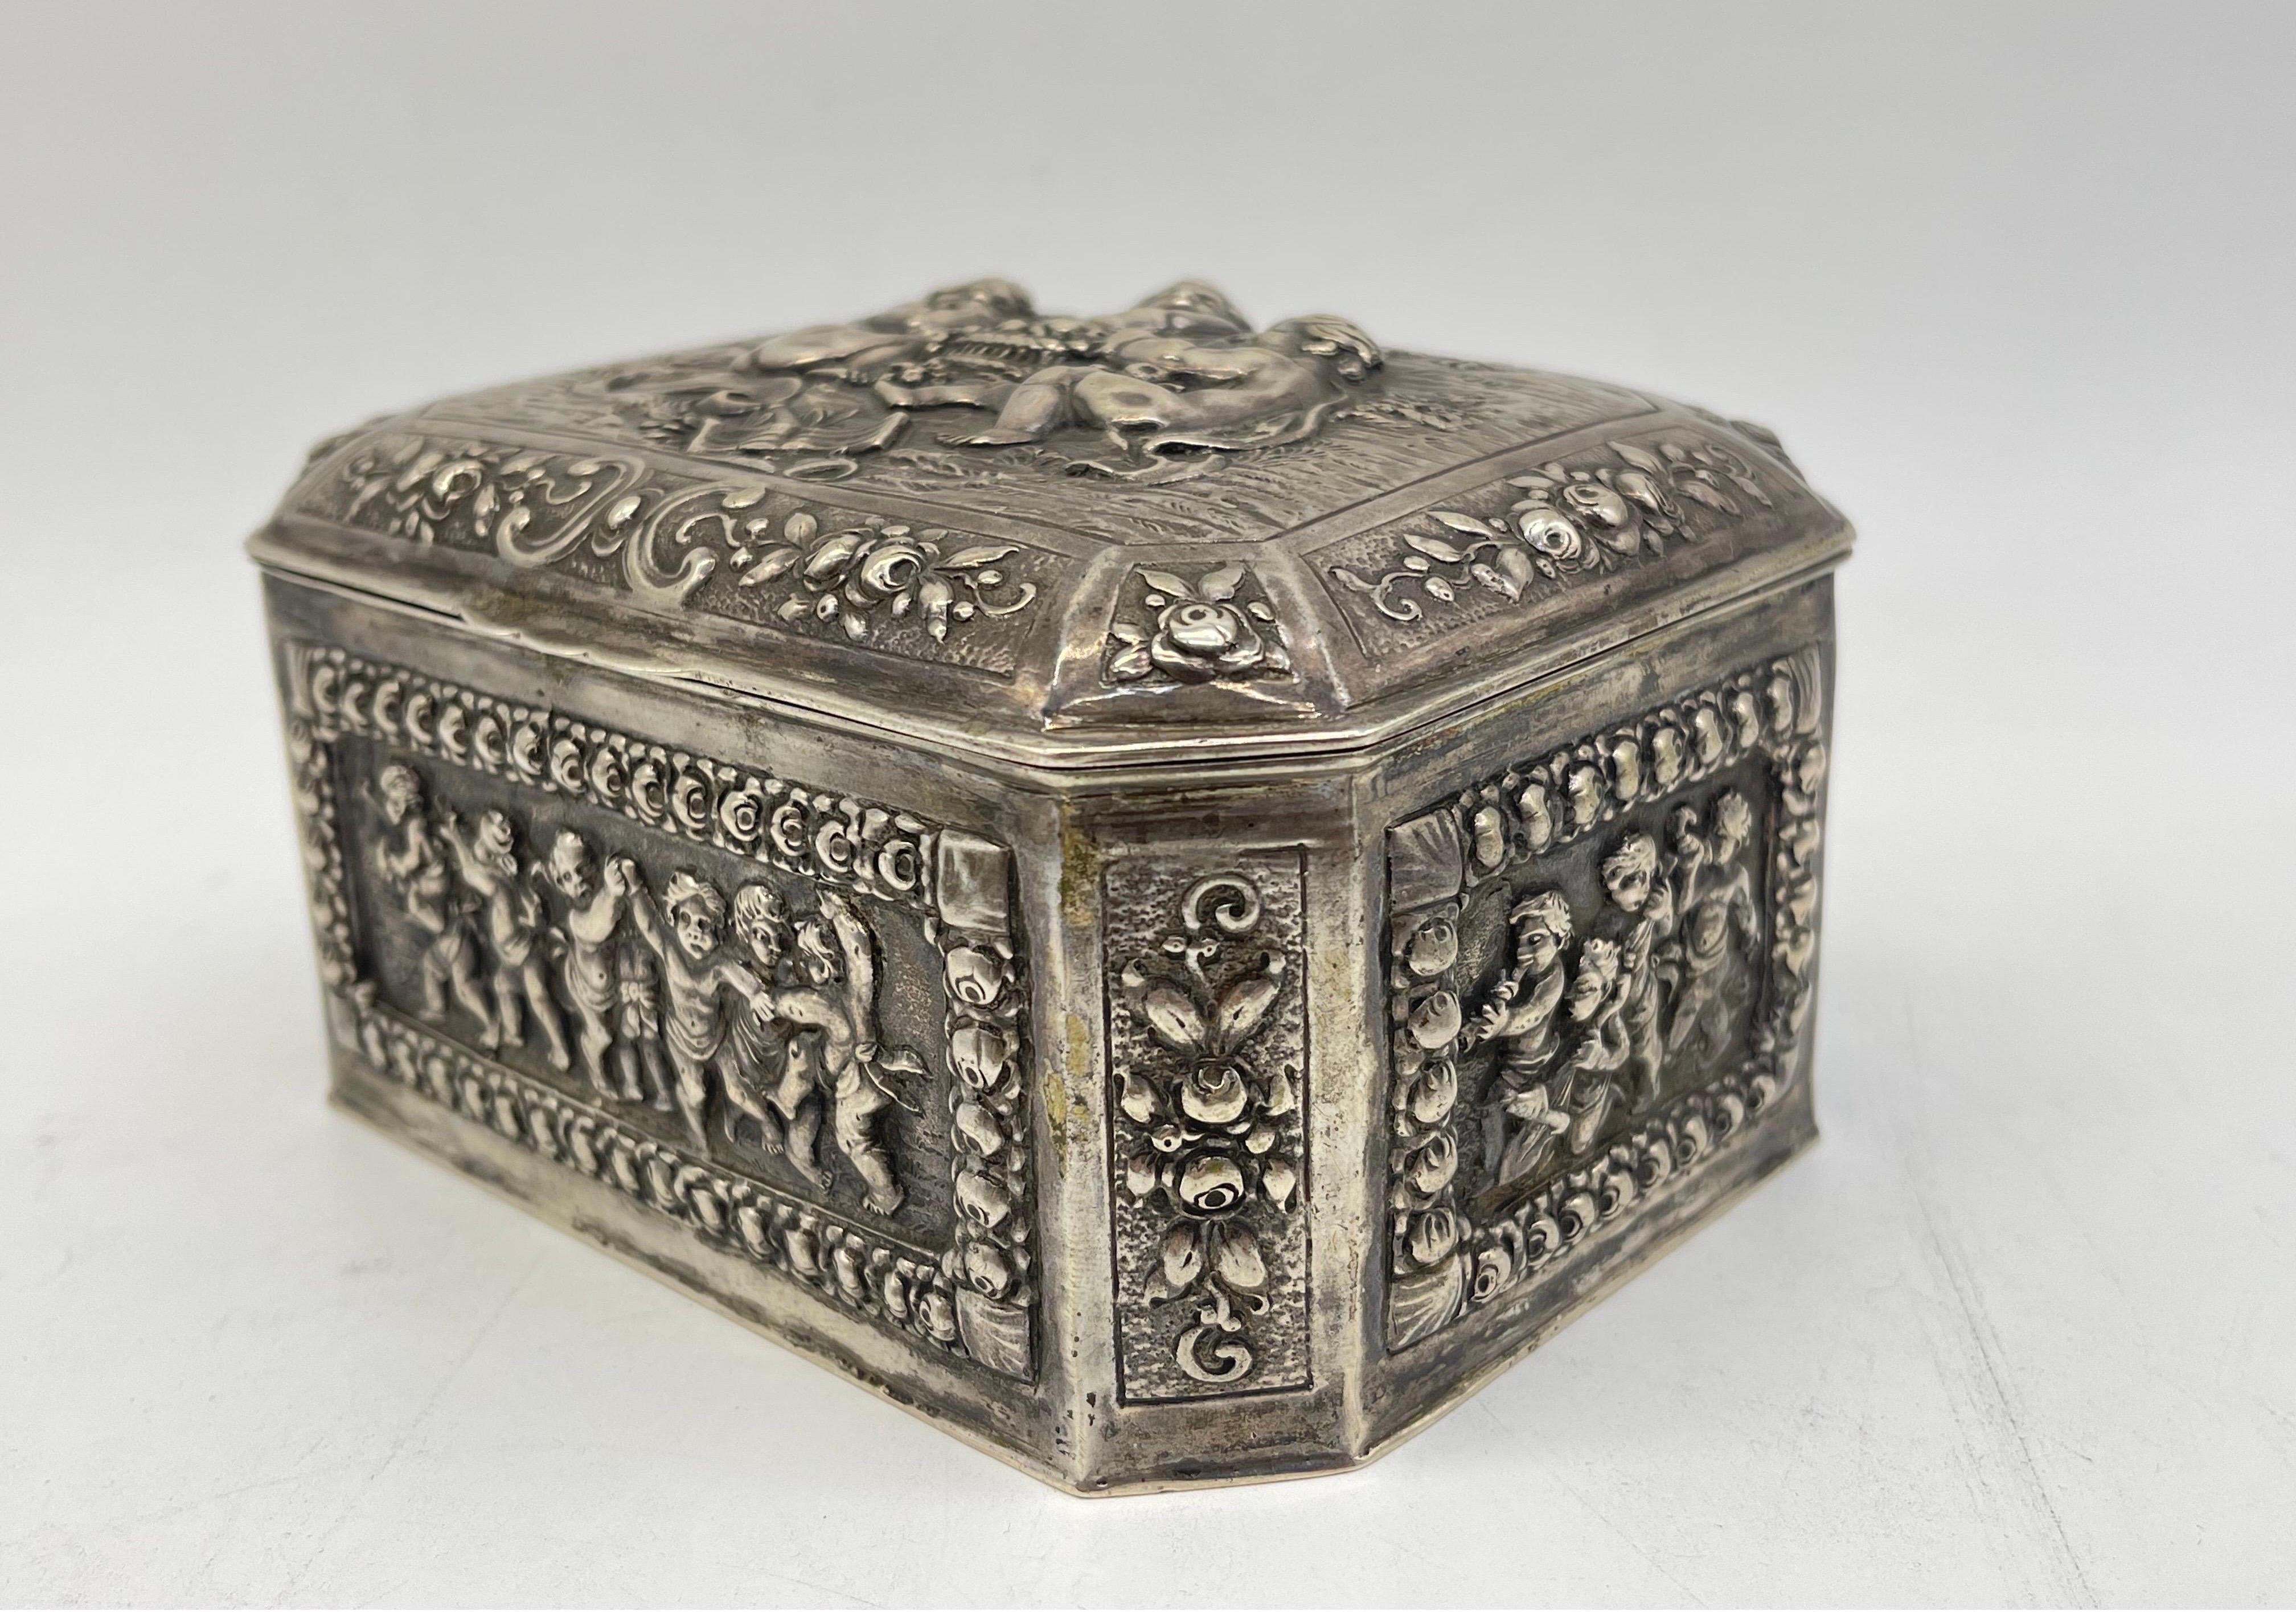 Antique 800 Silver Bonboniere / Sugar- Lidded box

Christoph Widmann - Germany - 800 Silver
Flowers & Children ornament - inside gilded

Weight: 386 grams

The condition can be seen in the pictures.